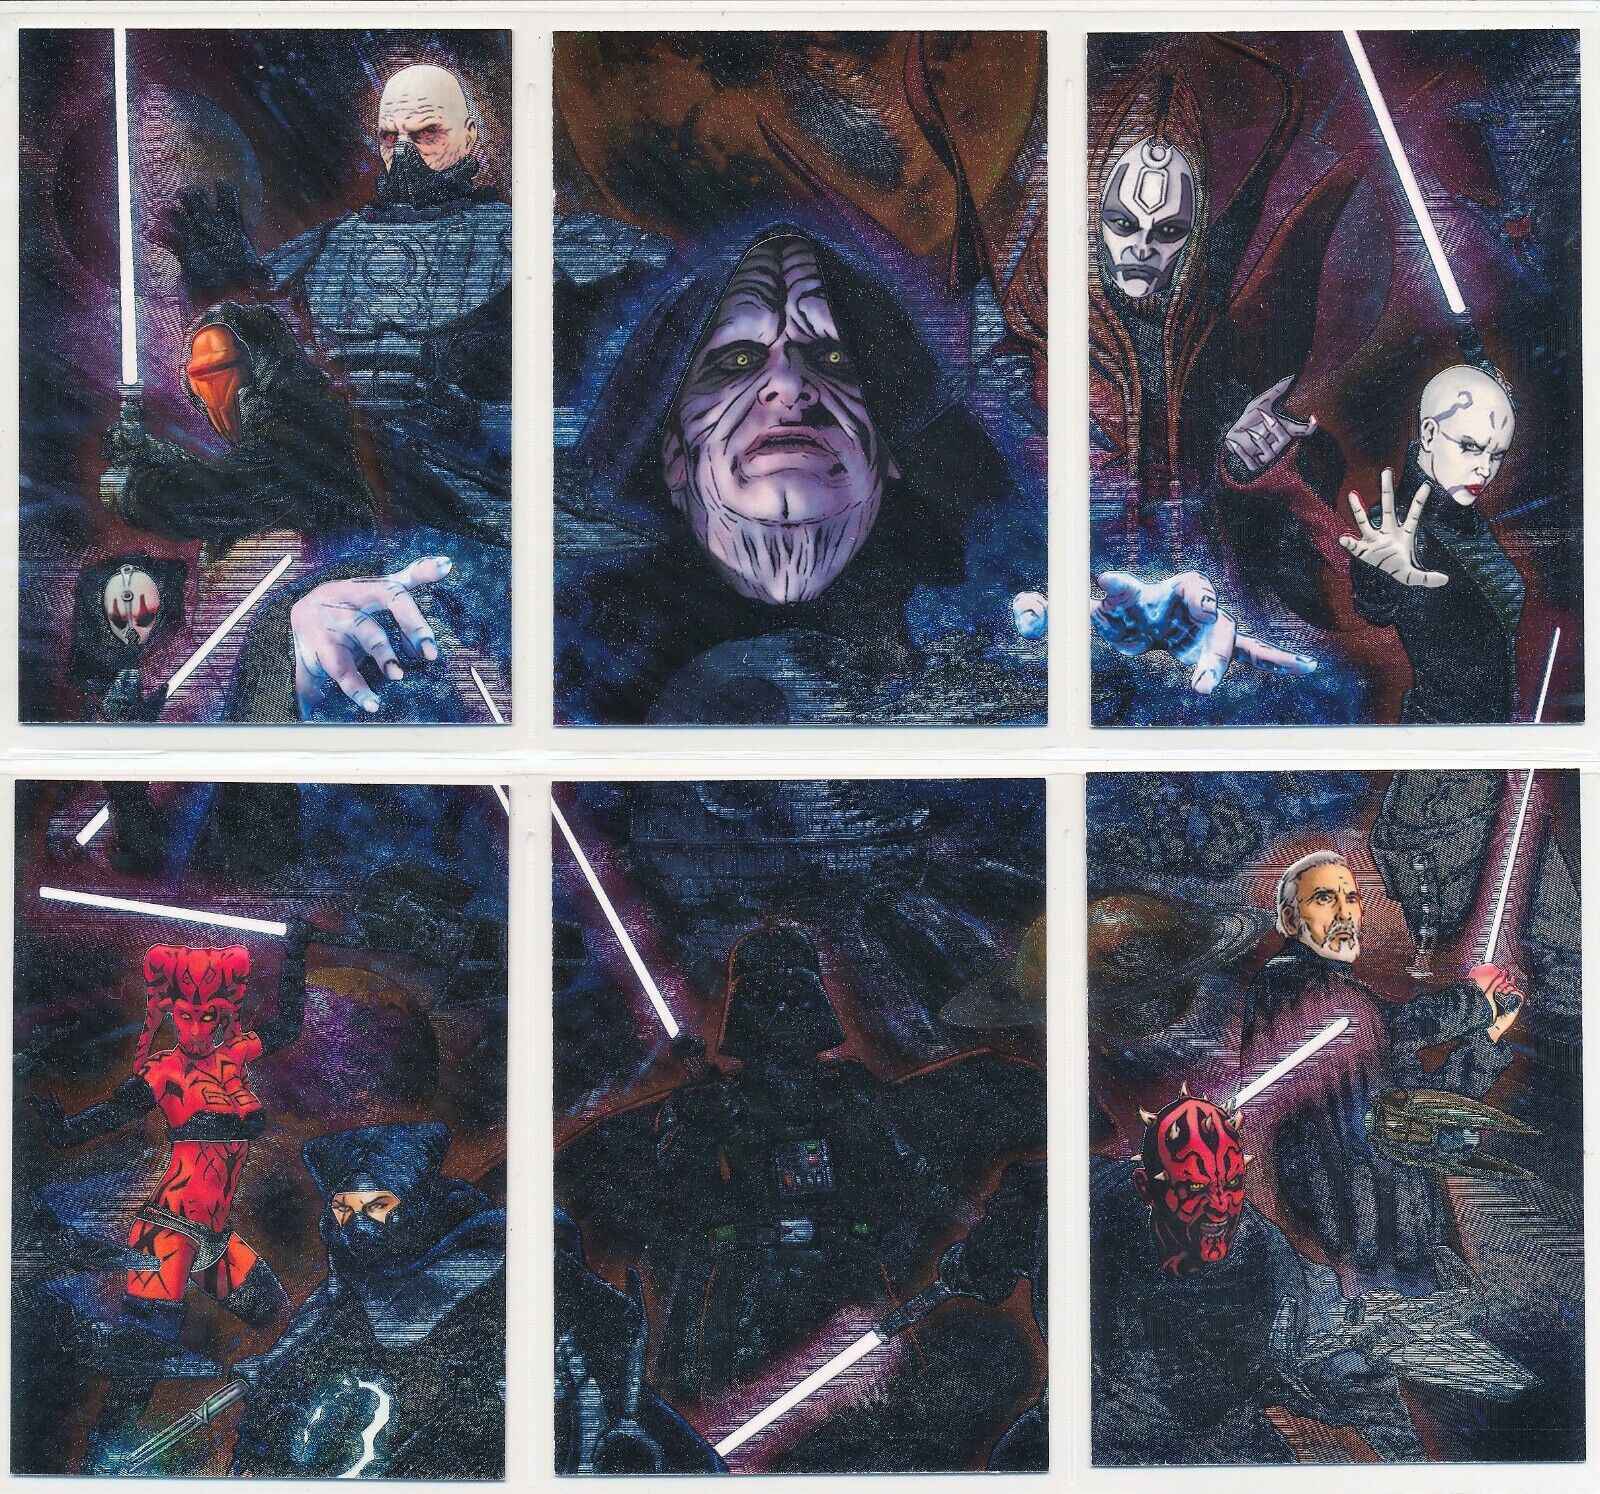 2012 Topps Star Wars Galaxy Series 7 Etched-Foil Chase set of 6 cards